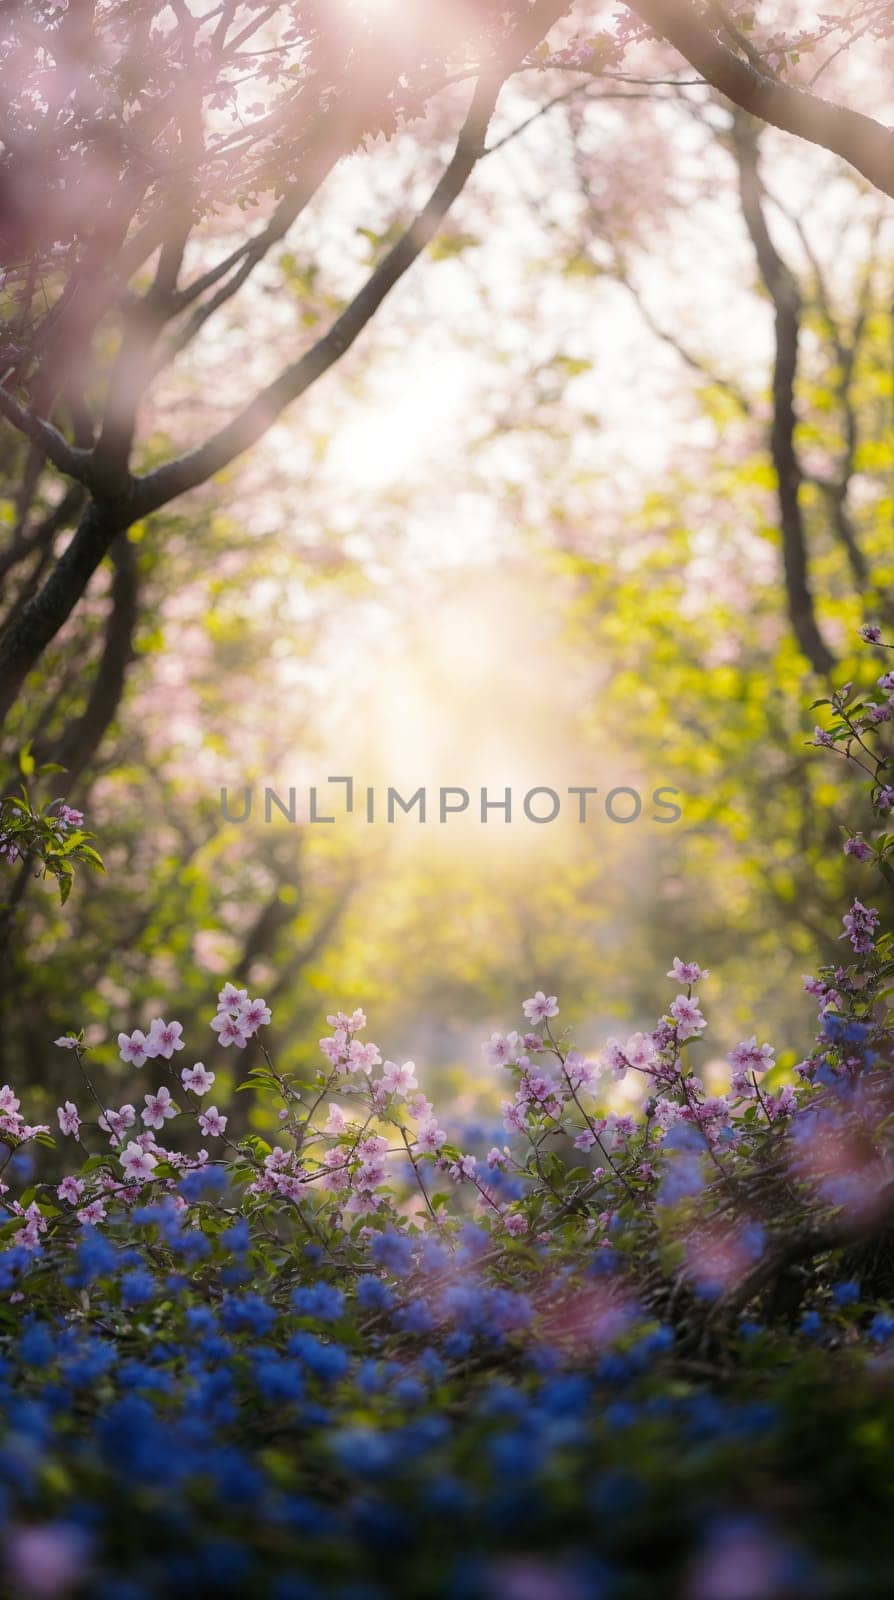 A photo capturing the rays of the sun shining through a dense forest, illuminating the trees and flowers below.